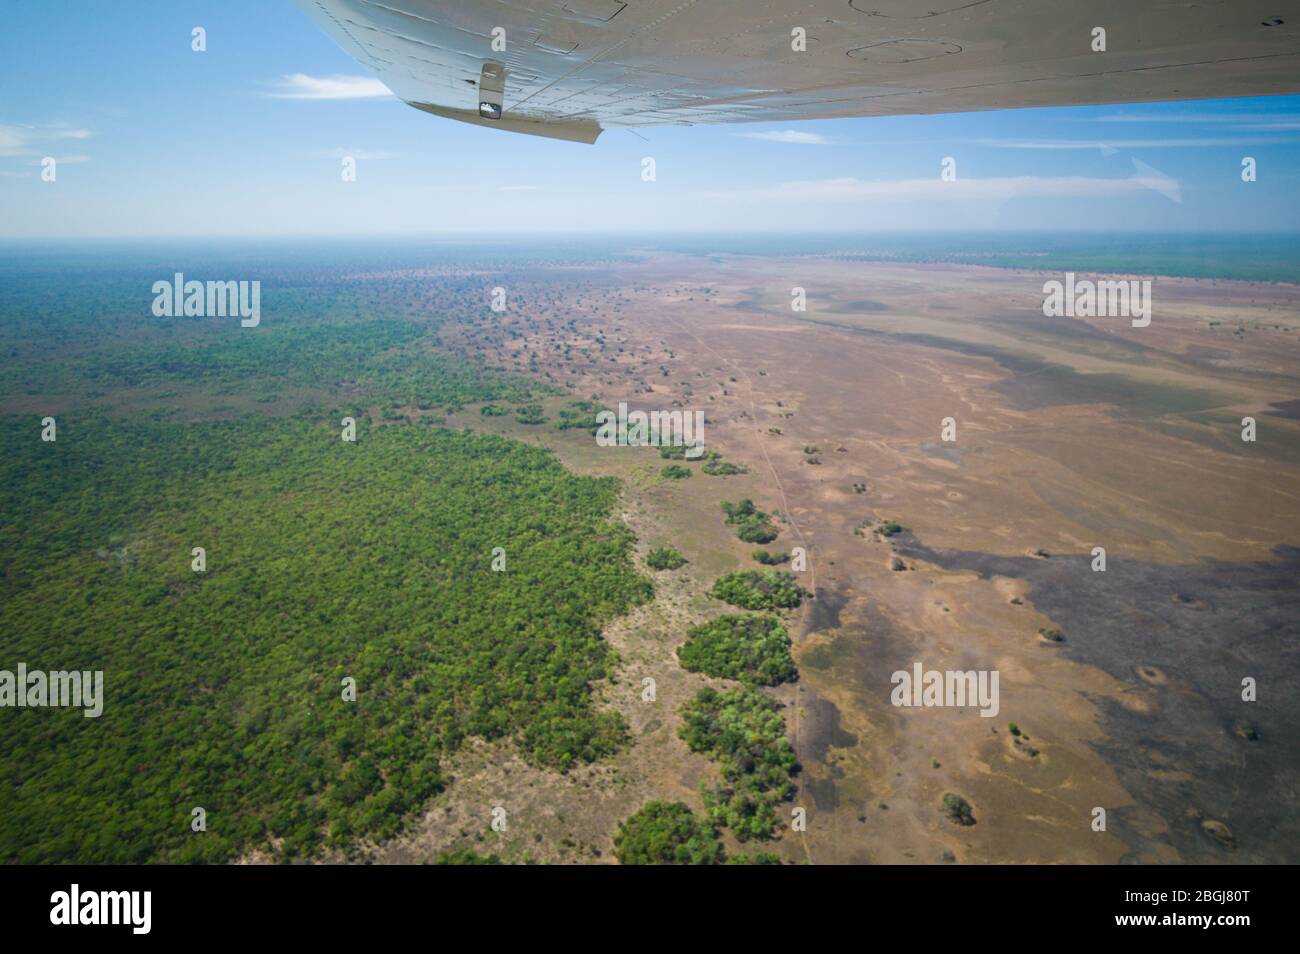 Kafue National Park, North Western Province, Zambia has vast stretches of miombo woodlands and Busanga floodplain swamps, as seen from a small plane. Stock Photo